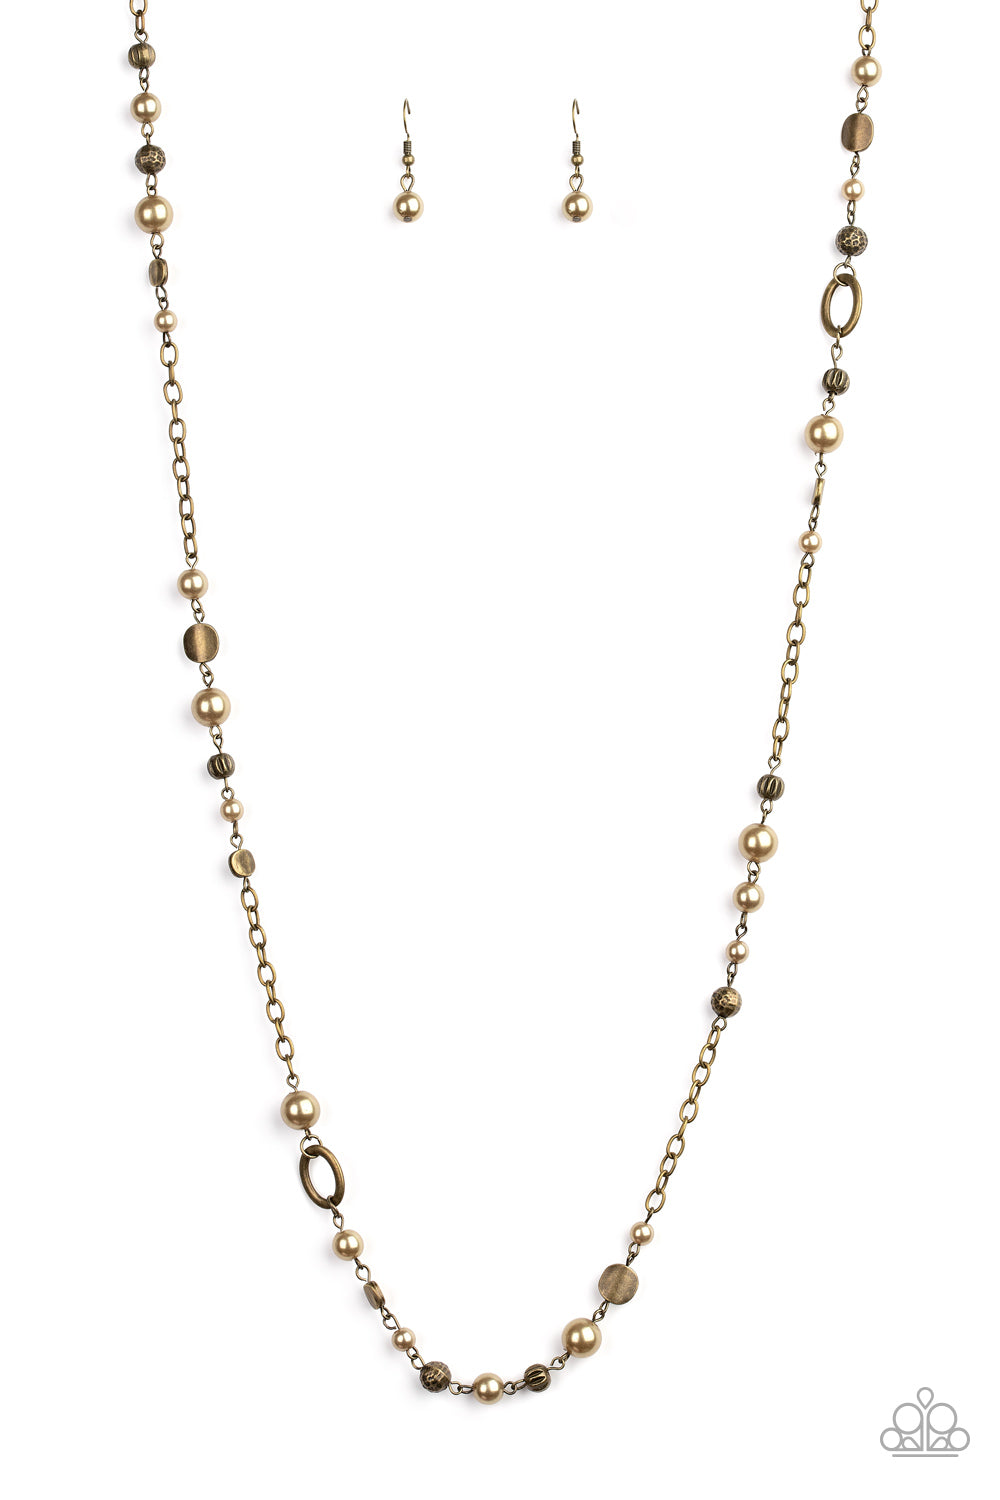 Make an Appearance - brass - Paparazzi necklace